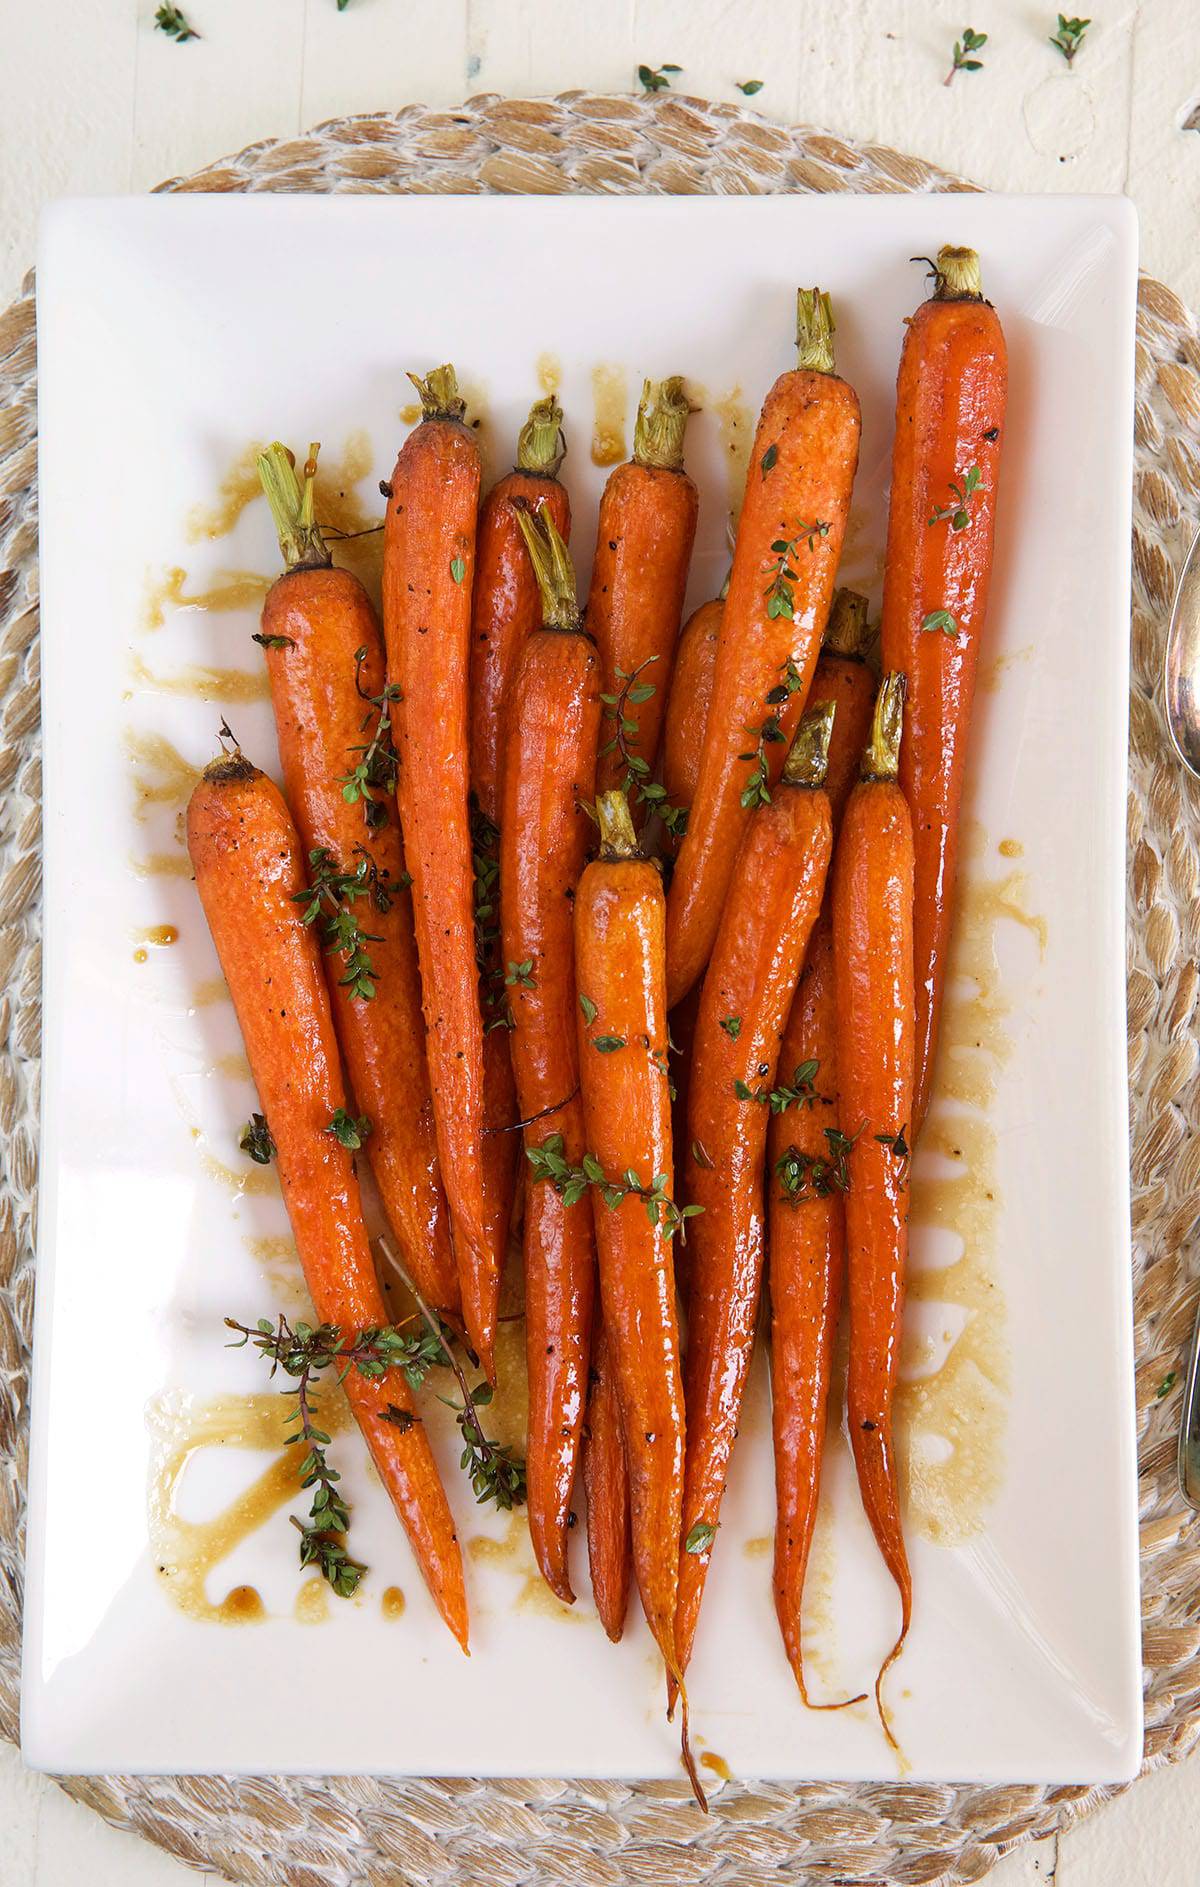 Carrots are placed in the center of a white plate.